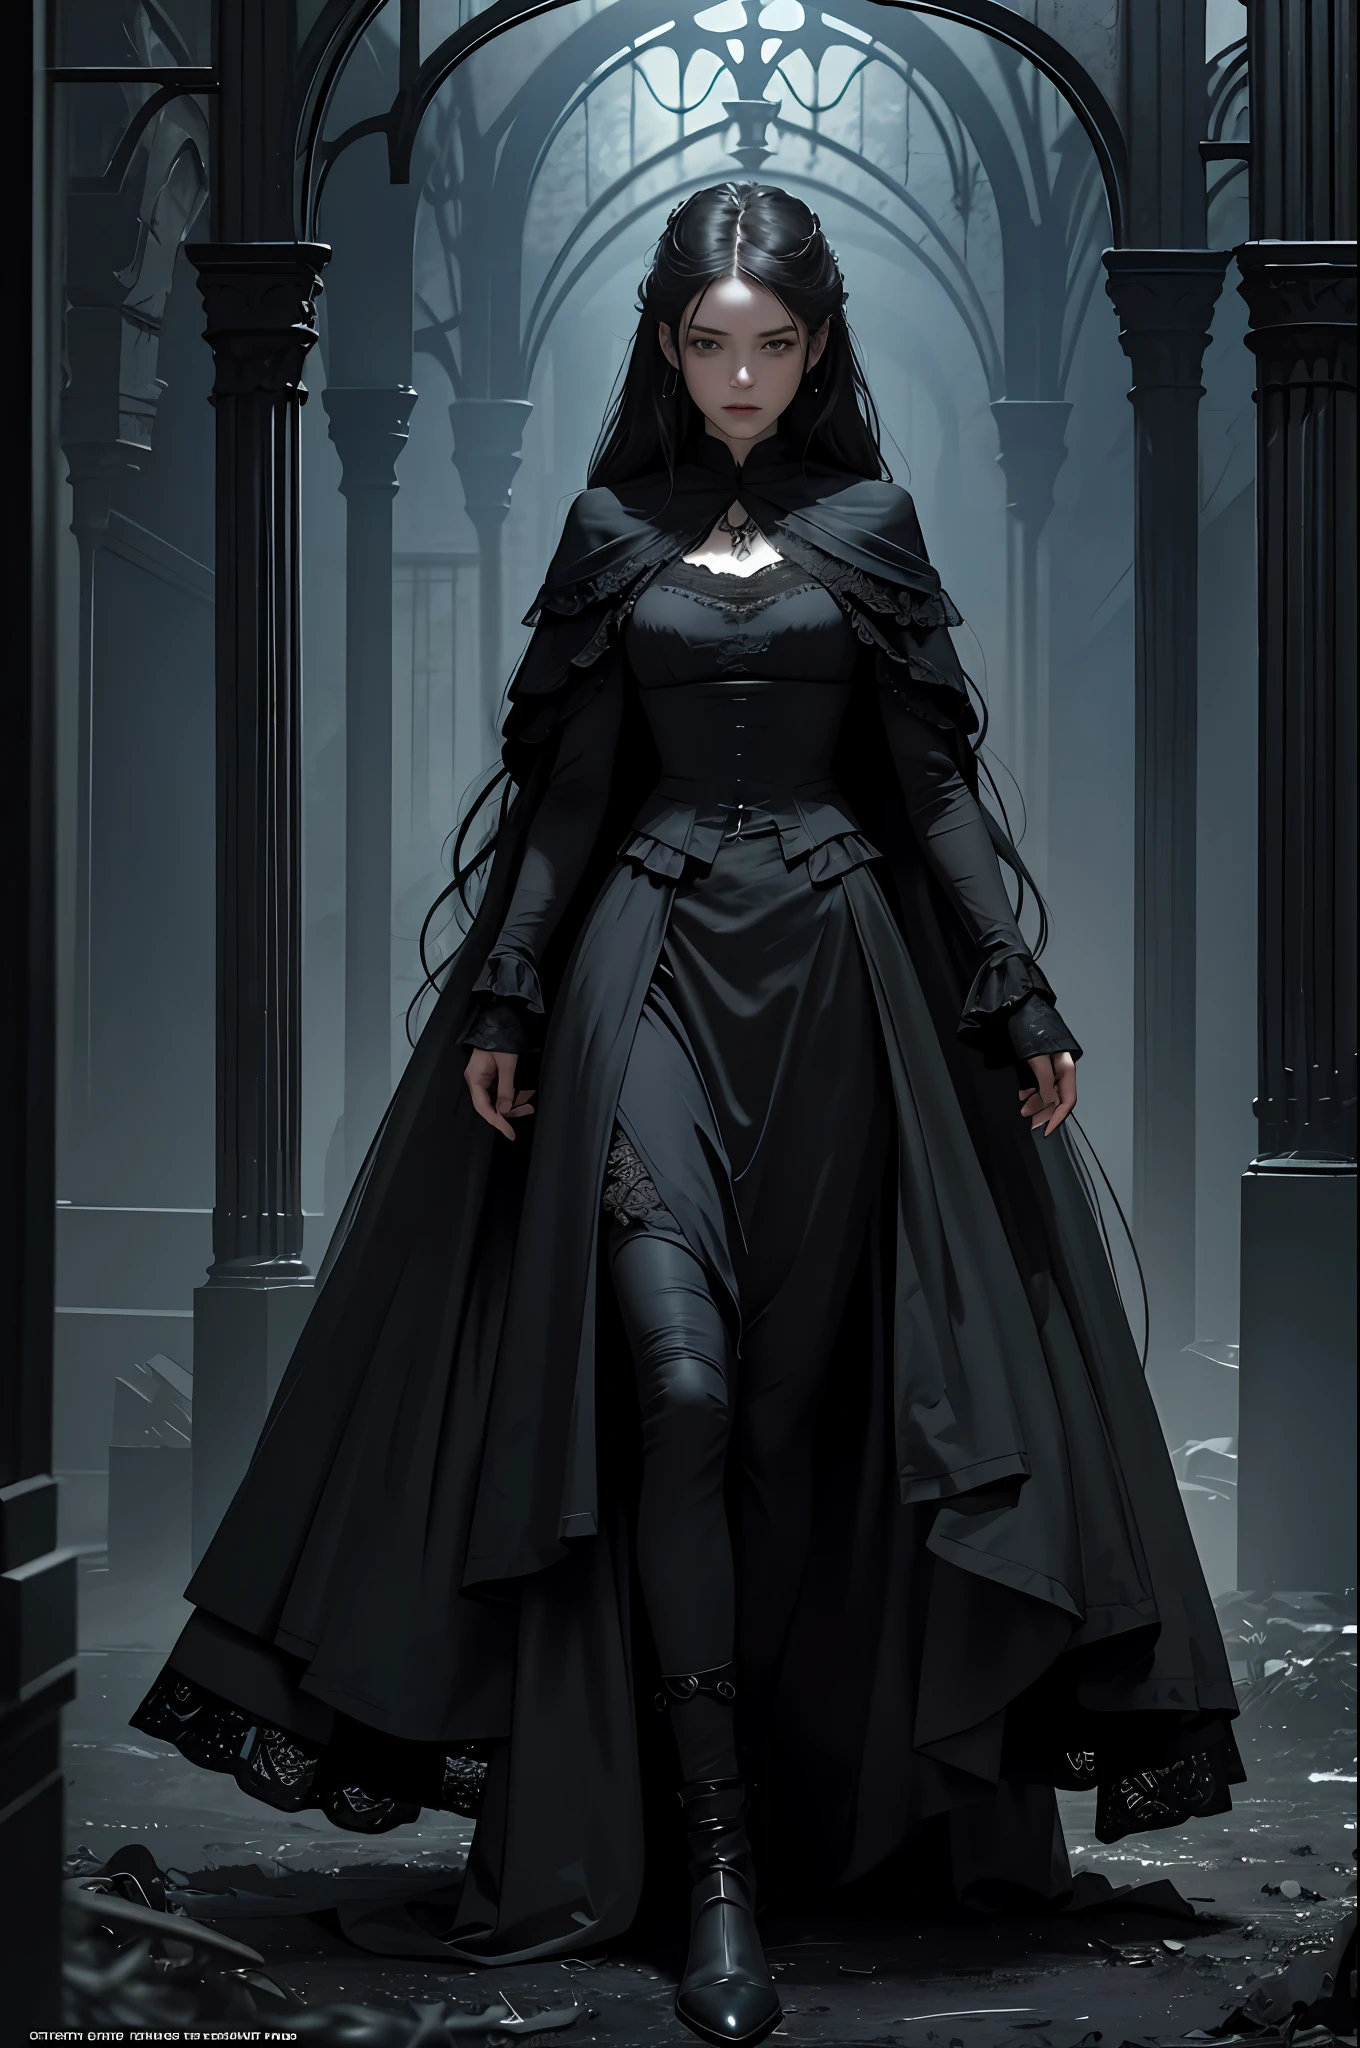 Official art, Unity 8k wallpaper, super detailed, best quality, full body
dark, atmospheric, mystical, romantic, creepy, literature, art, fashion, victorian, decoration, intricacies, ironwork, contemplation, emotional depth, supernatural, 1 girl, solo, flat chest, knight, full body composition